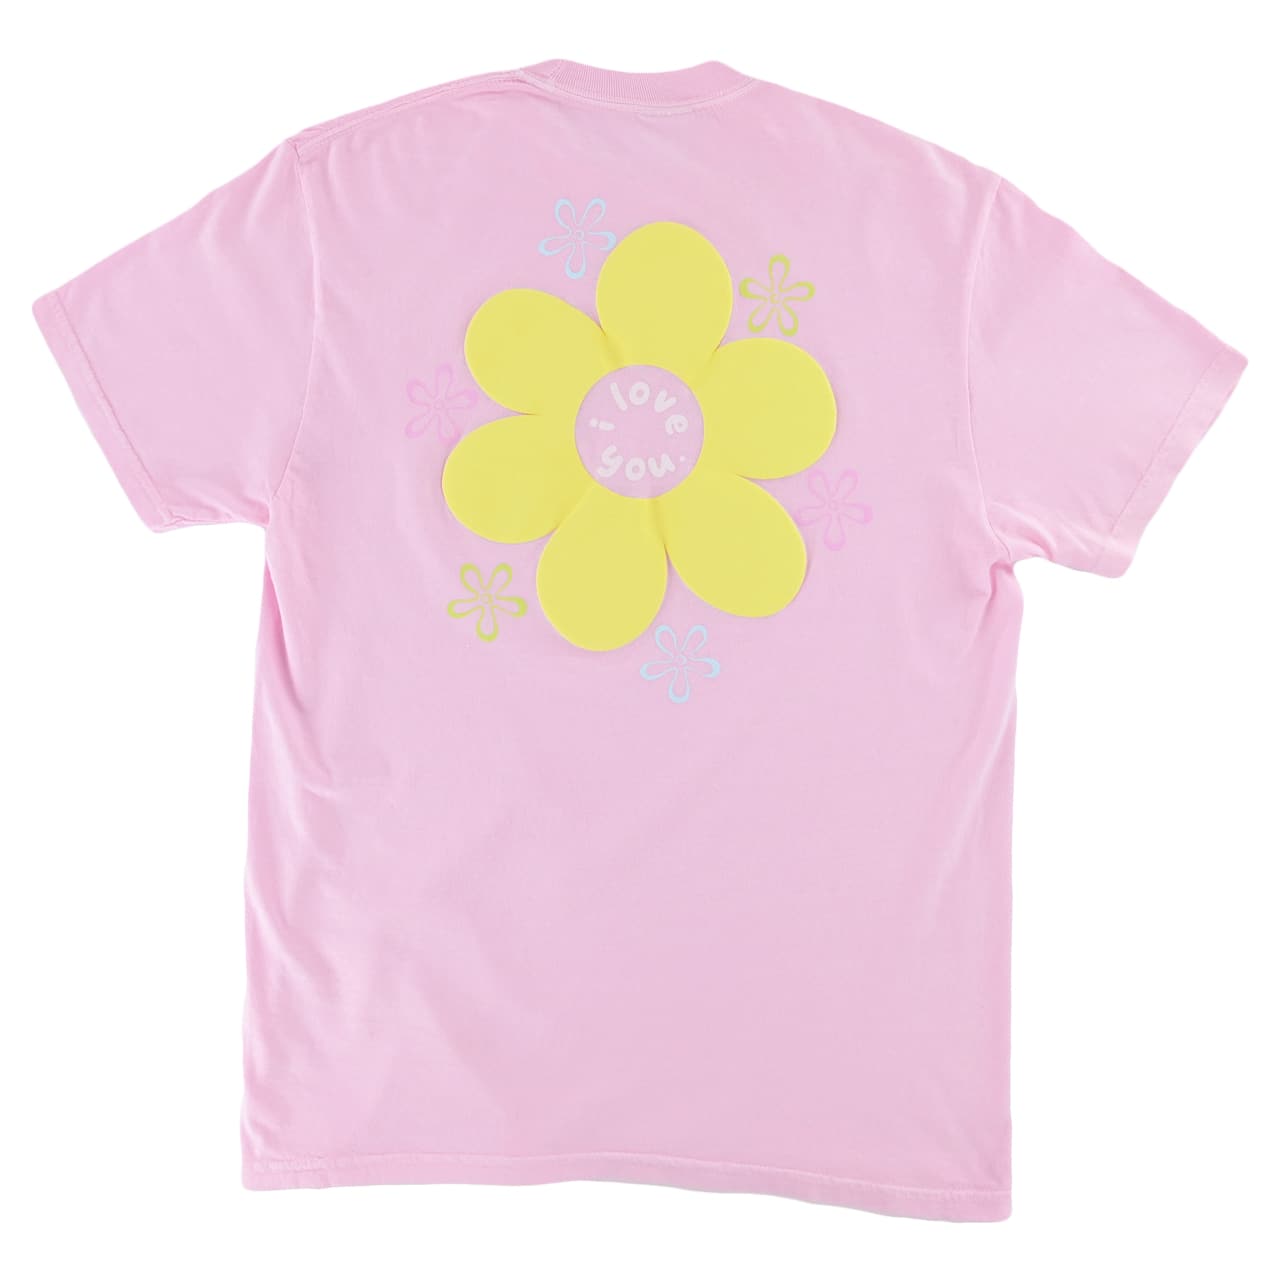 Punz 143 Embroidered T-Shirt